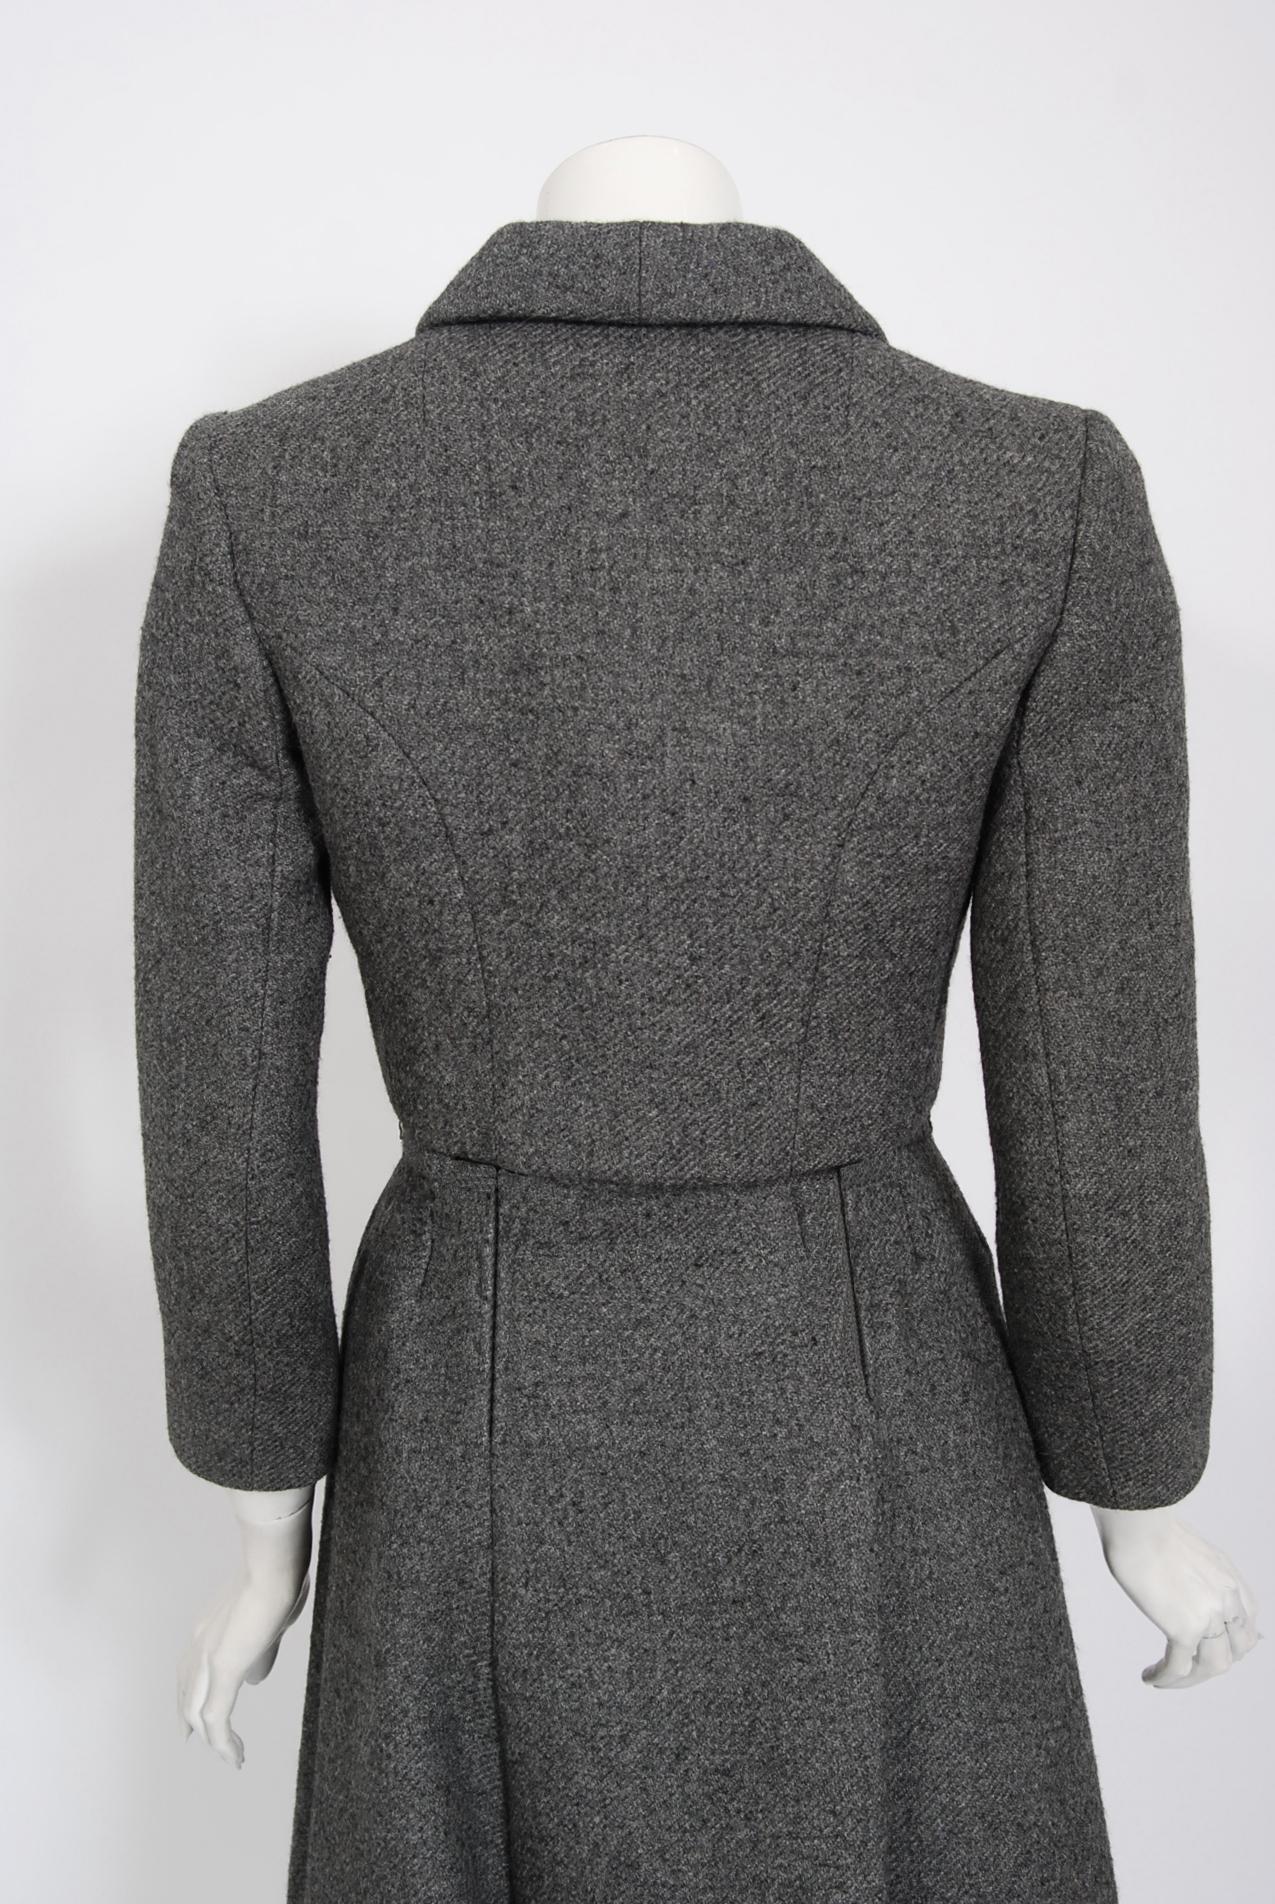 Vintage 1964 Norman Norell Documented Gray Wool Dress w/ Double-Breasted Jacket 8